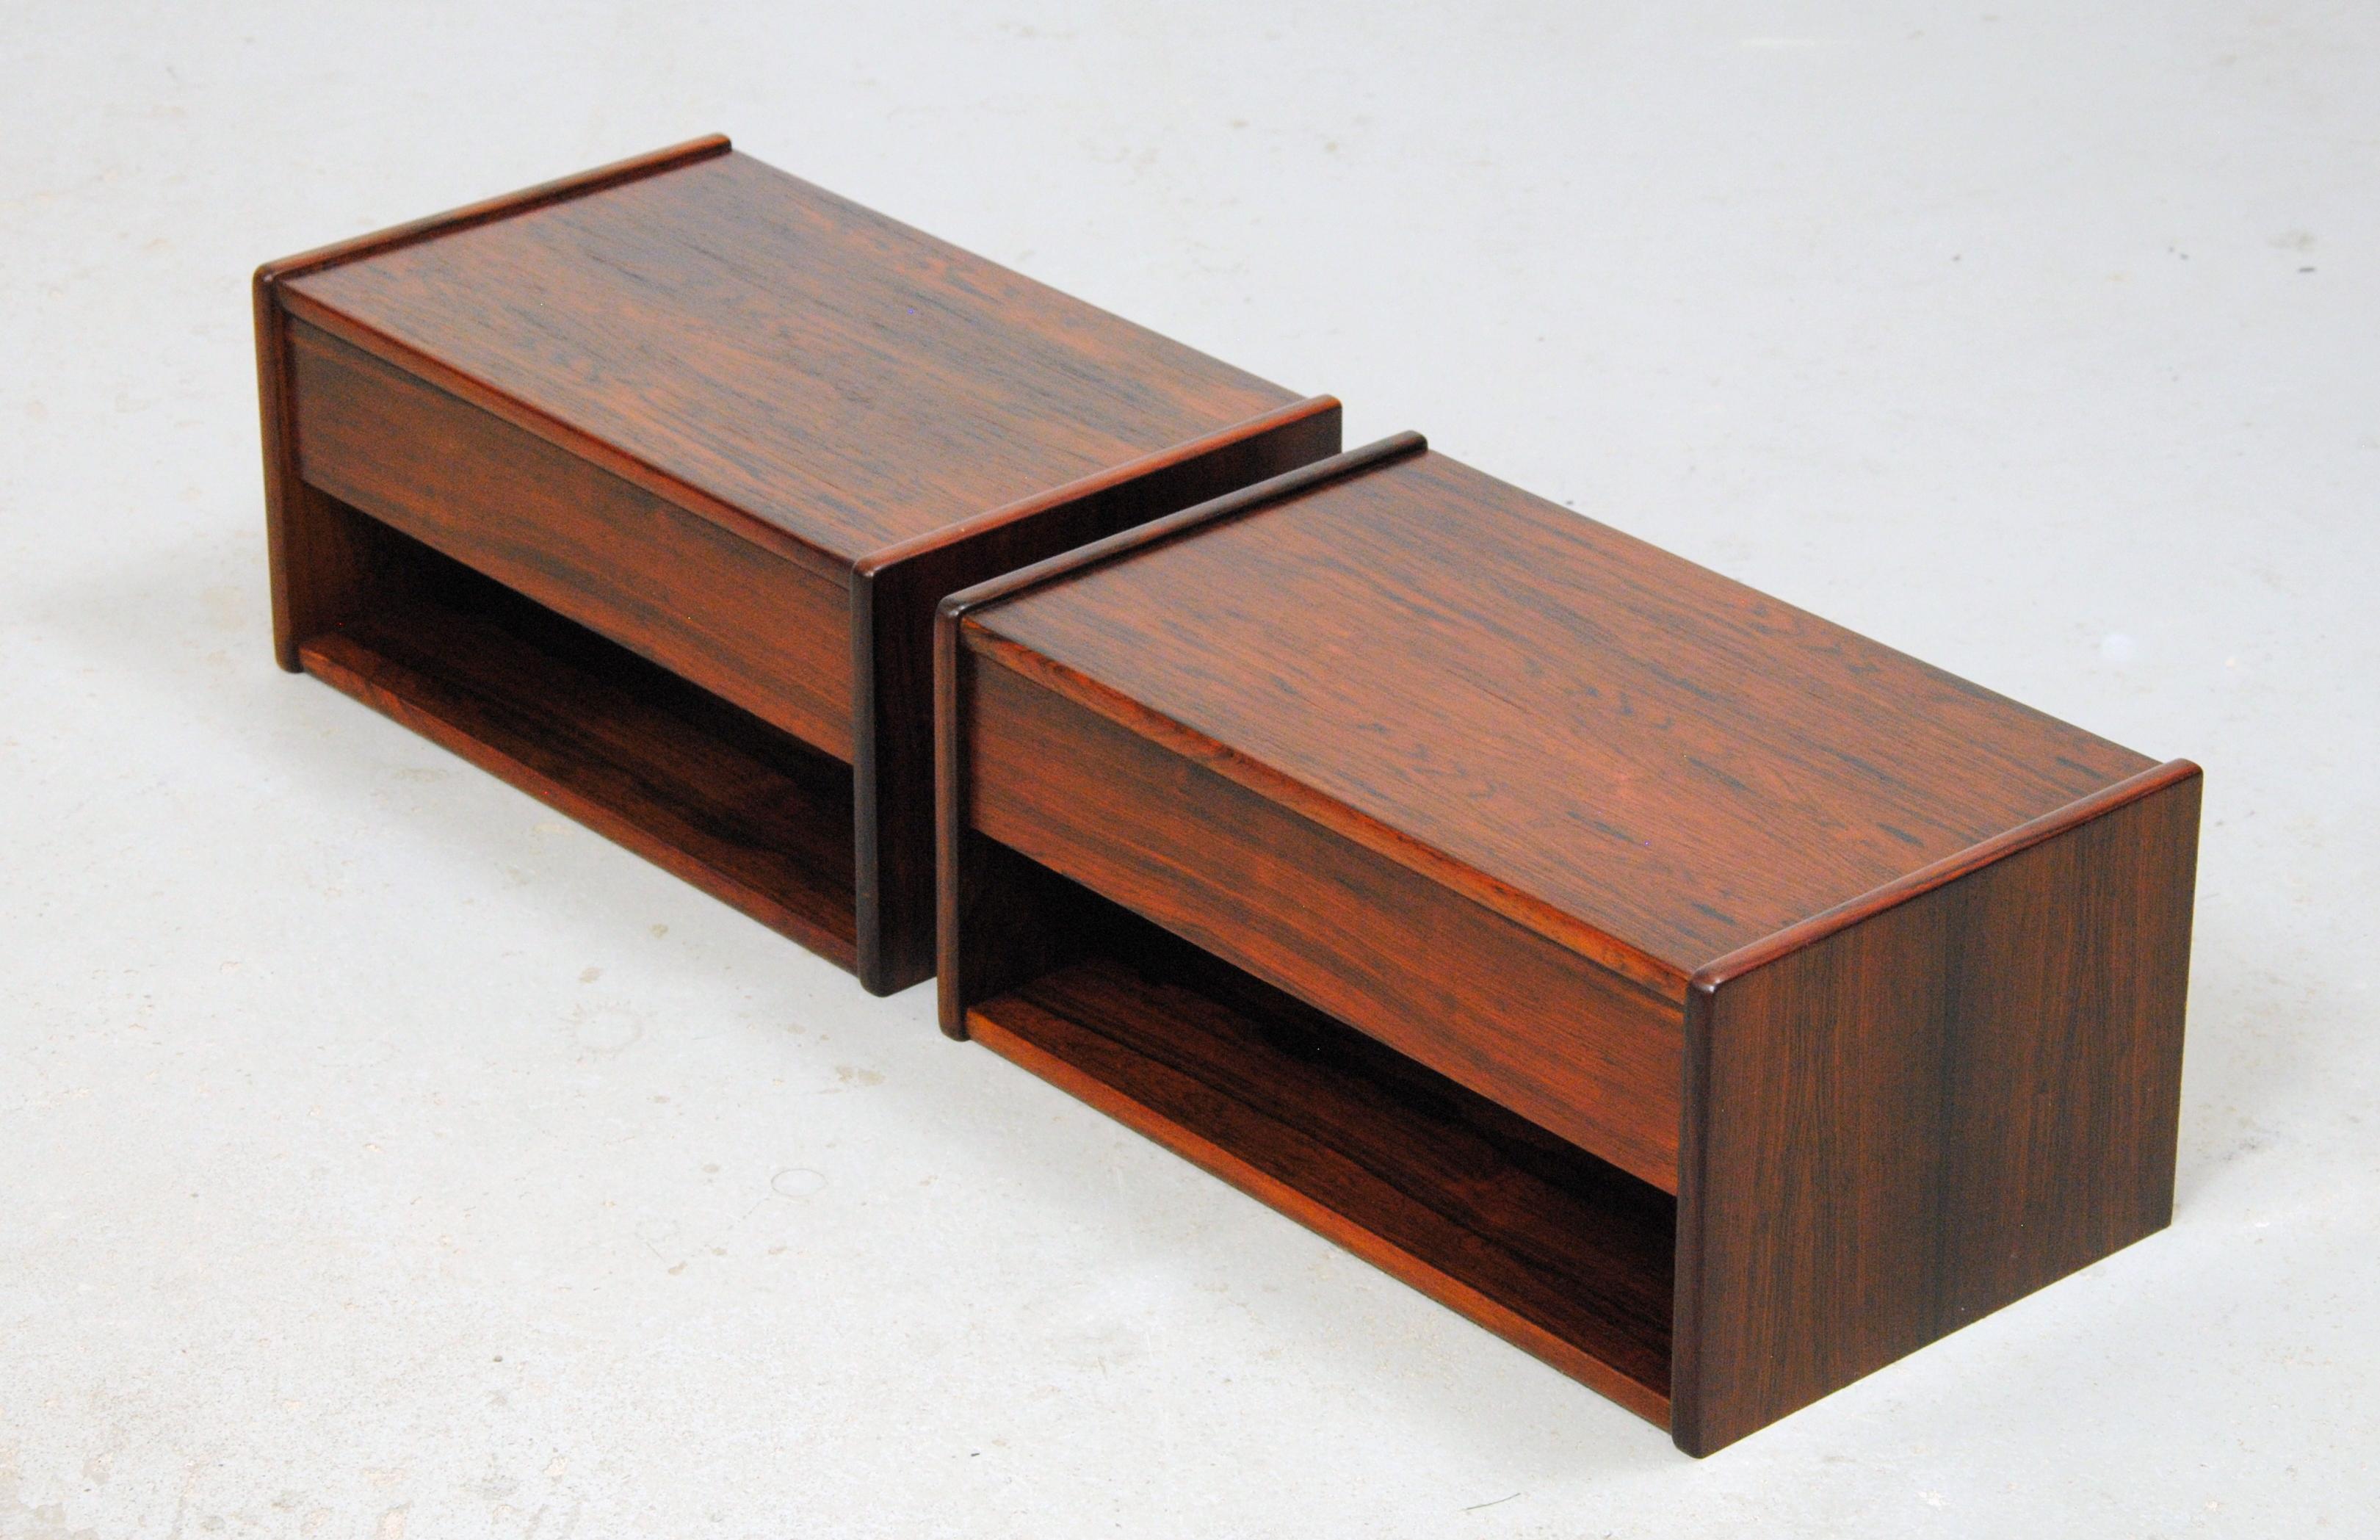 Set of two fully restored Danish floating rosewood nightstands.

The nightstands are examples of the minimalistic and functional yet beautiful design and advanced craftmanship that characterized Danish midcentury Furniture. 

The nightstands